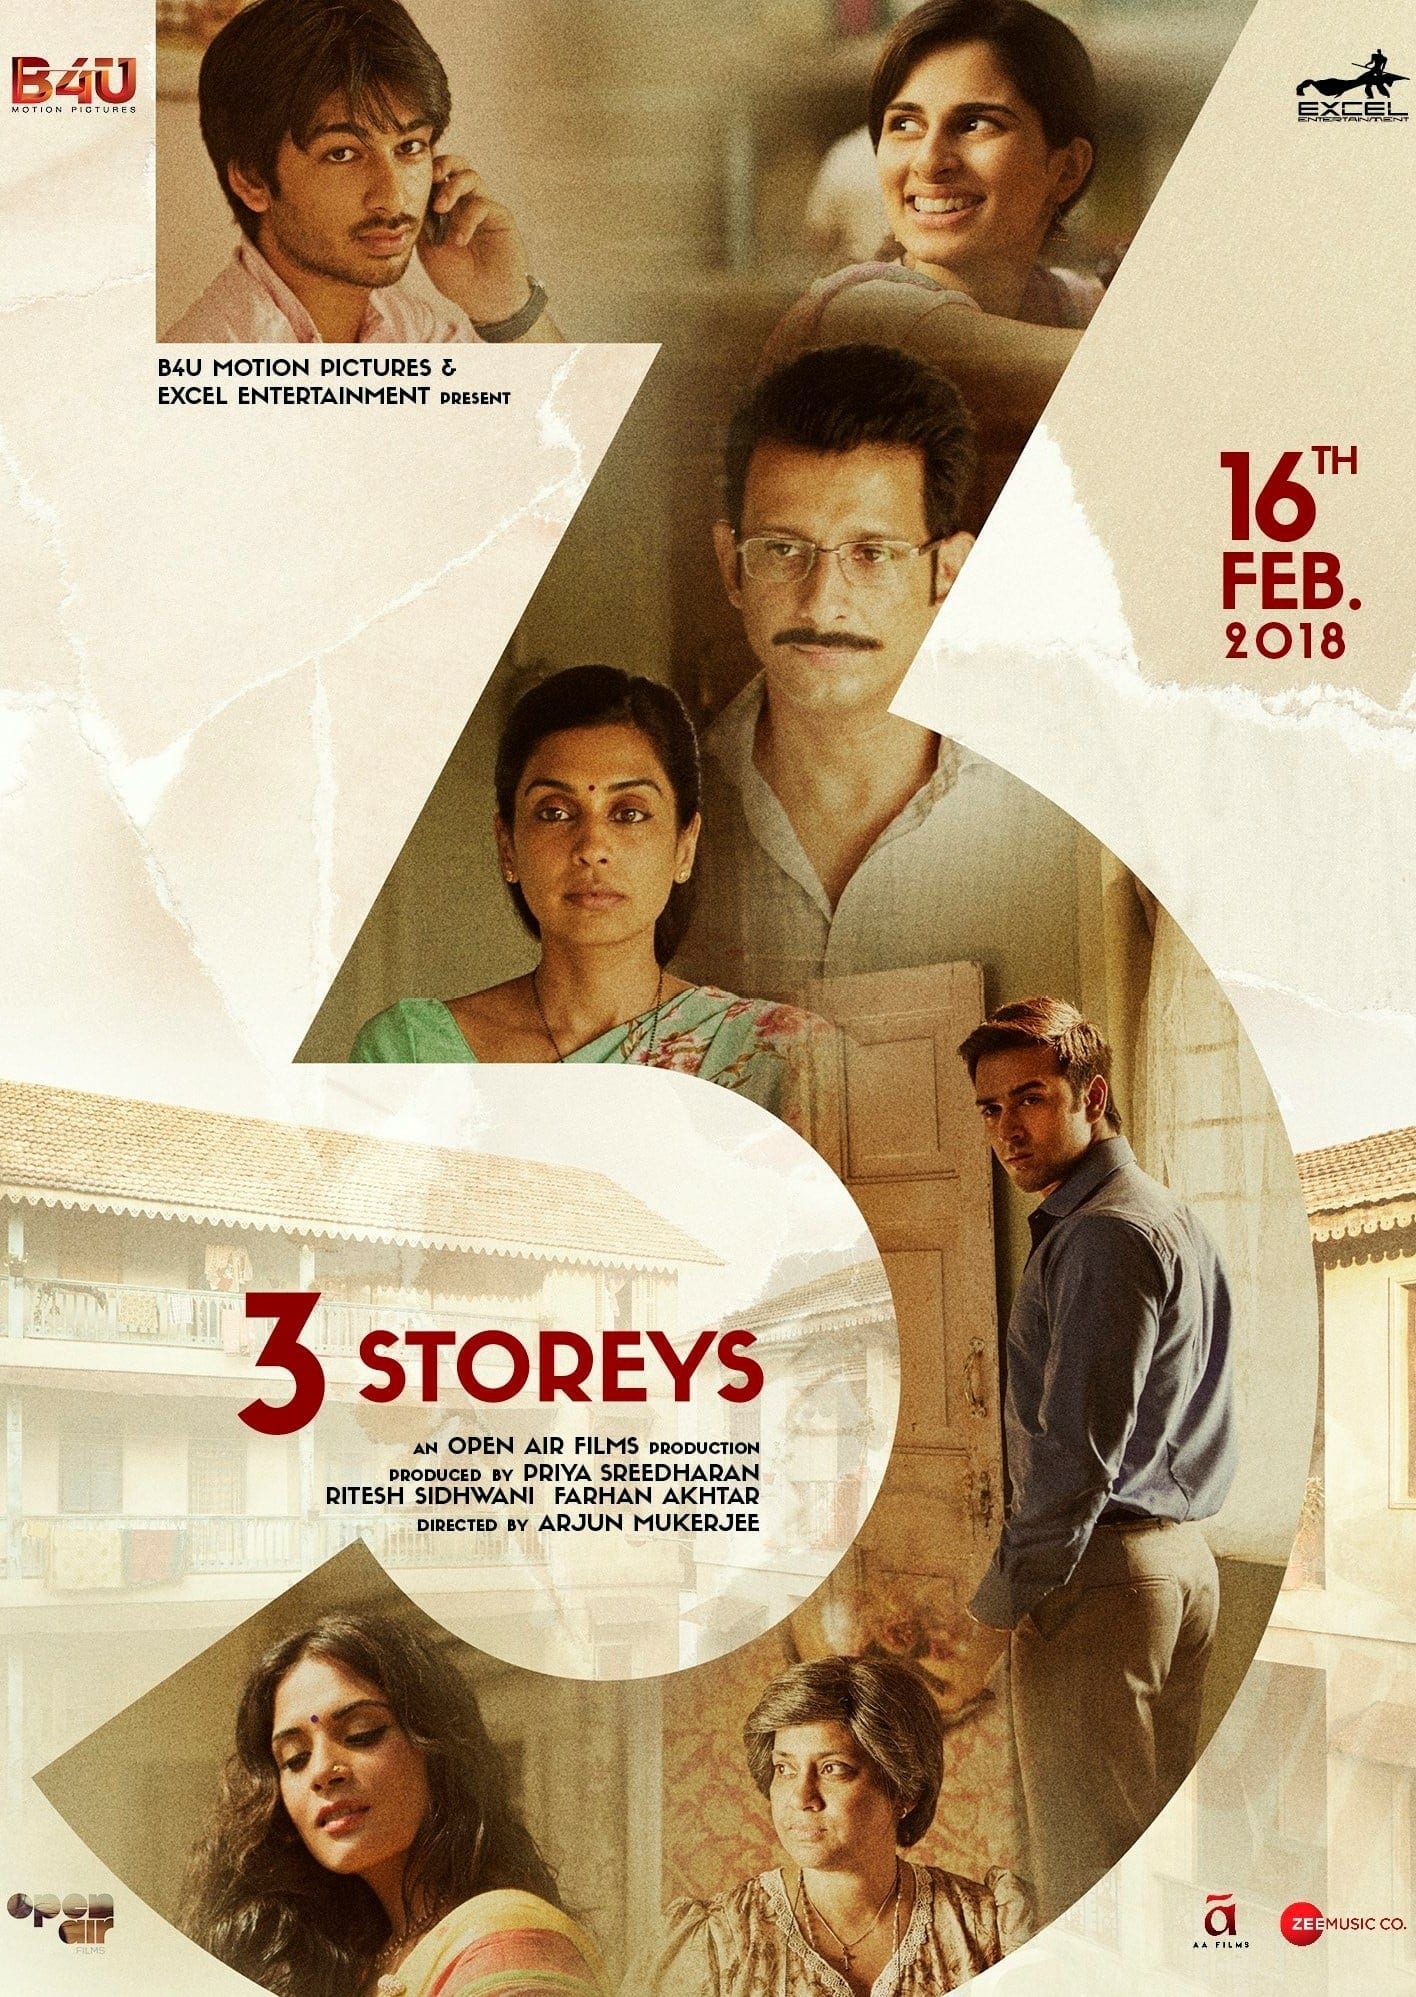 Poster for the movie "3 Storeys"